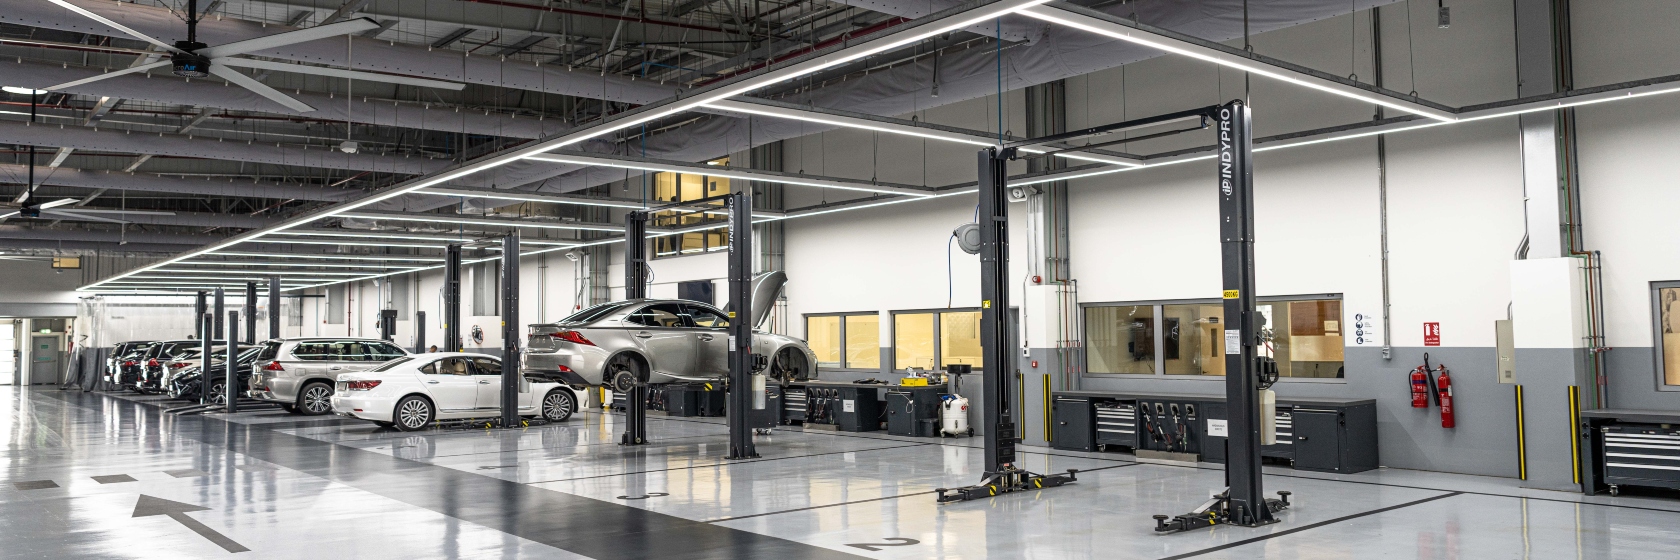 lexus-service-maintenance-packages-in-the-uae